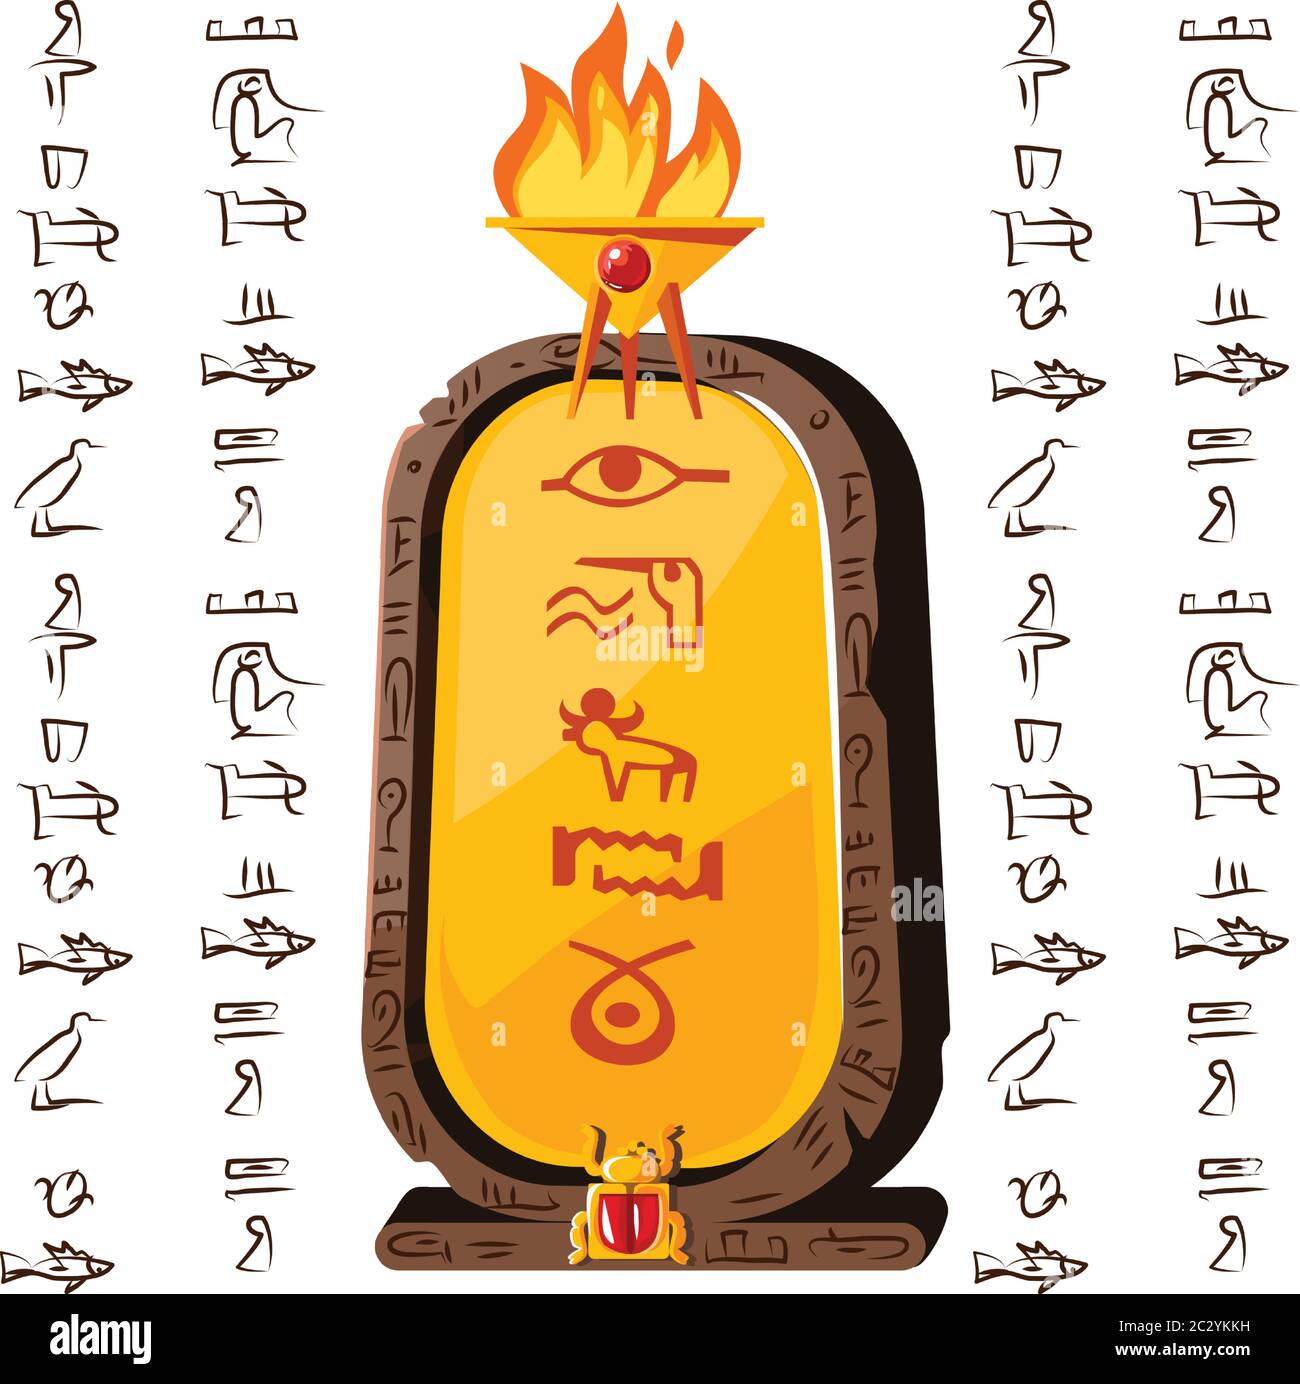 Stone board or clay tablet with sacrificial fire icon and Egyptian hieroglyphs cartoon vector illustration. Ancient object for recording storing infor Stock Vector